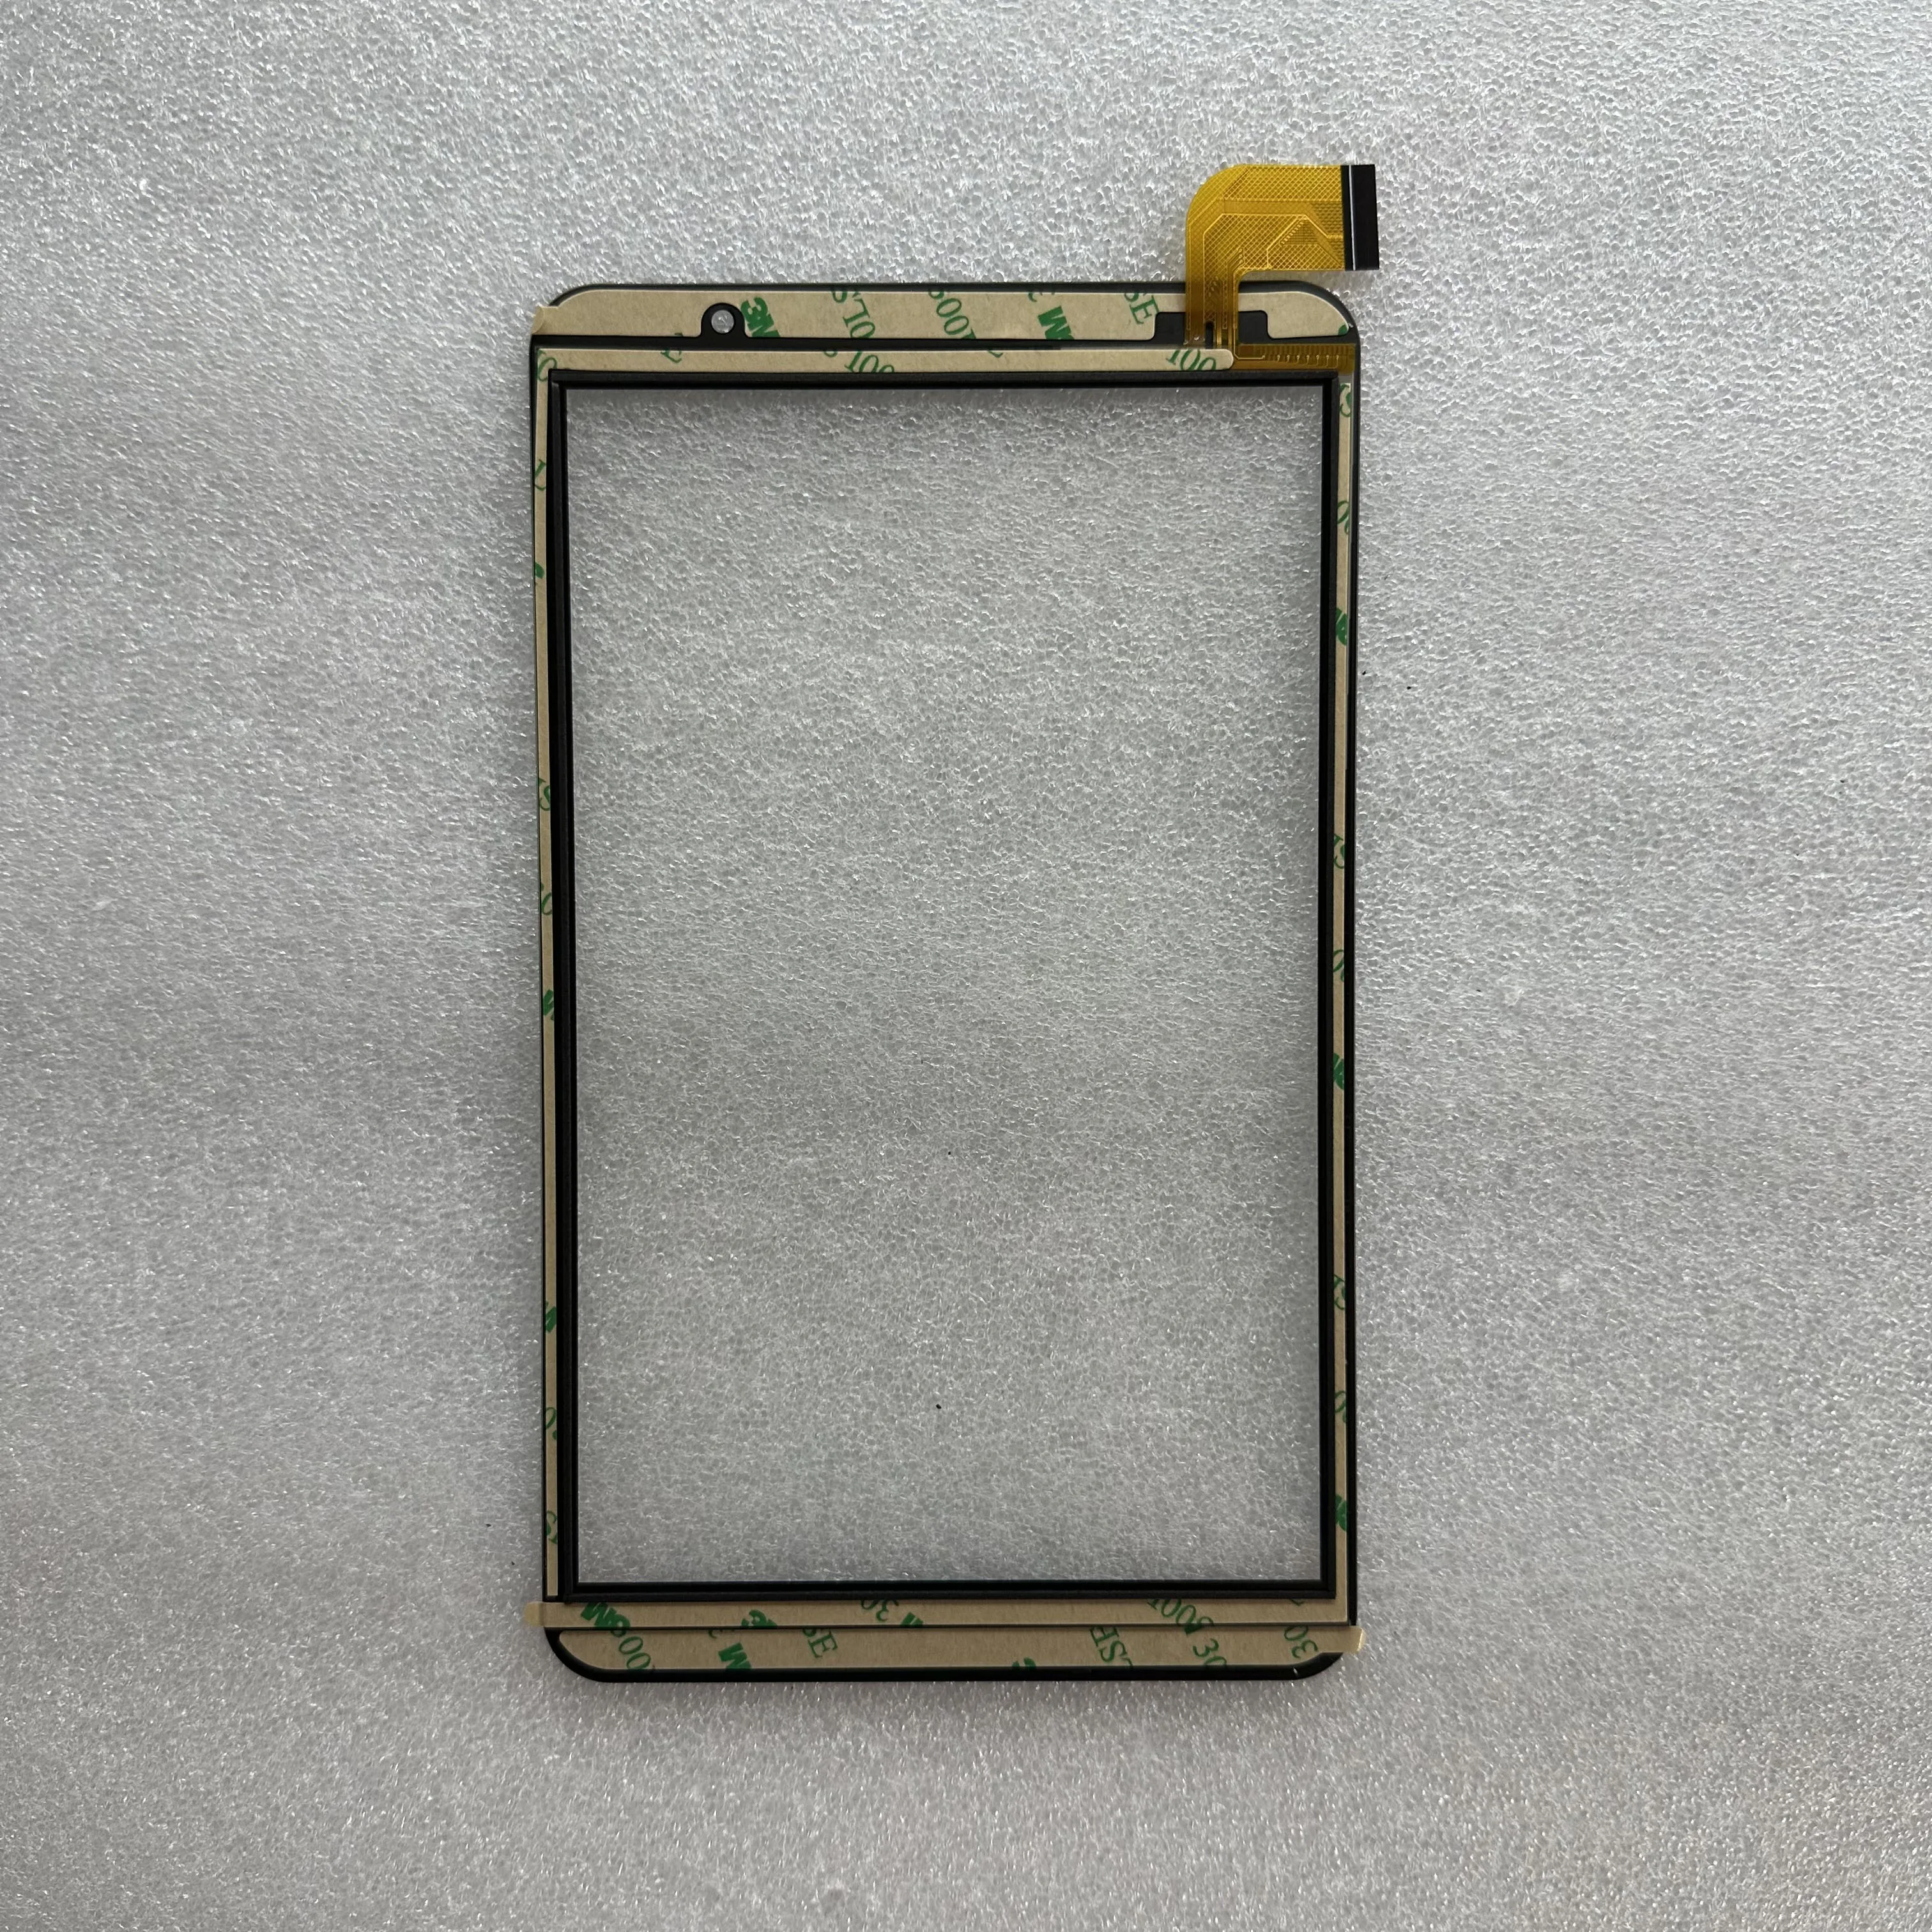 New For 8 inch kingvina GG8122 Tablet External Capacitive Touch Screen Digitizer Panel Sensor Replacement Phablet Multitouch